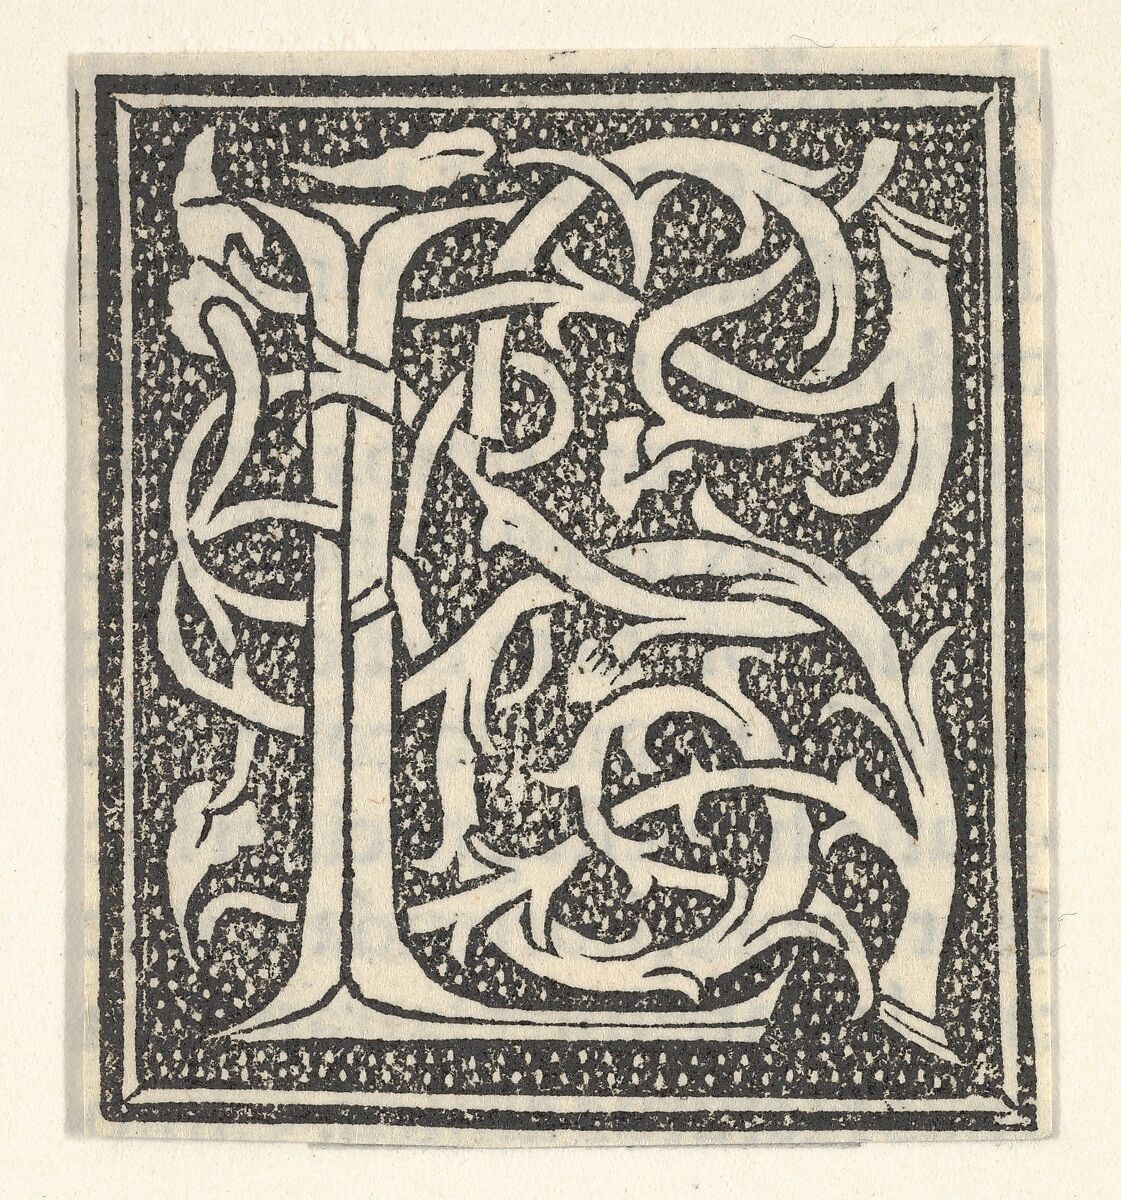 Initial letter L on patterned background, Anonymous, Italian, 16th century, Woodcut, criblé ground 